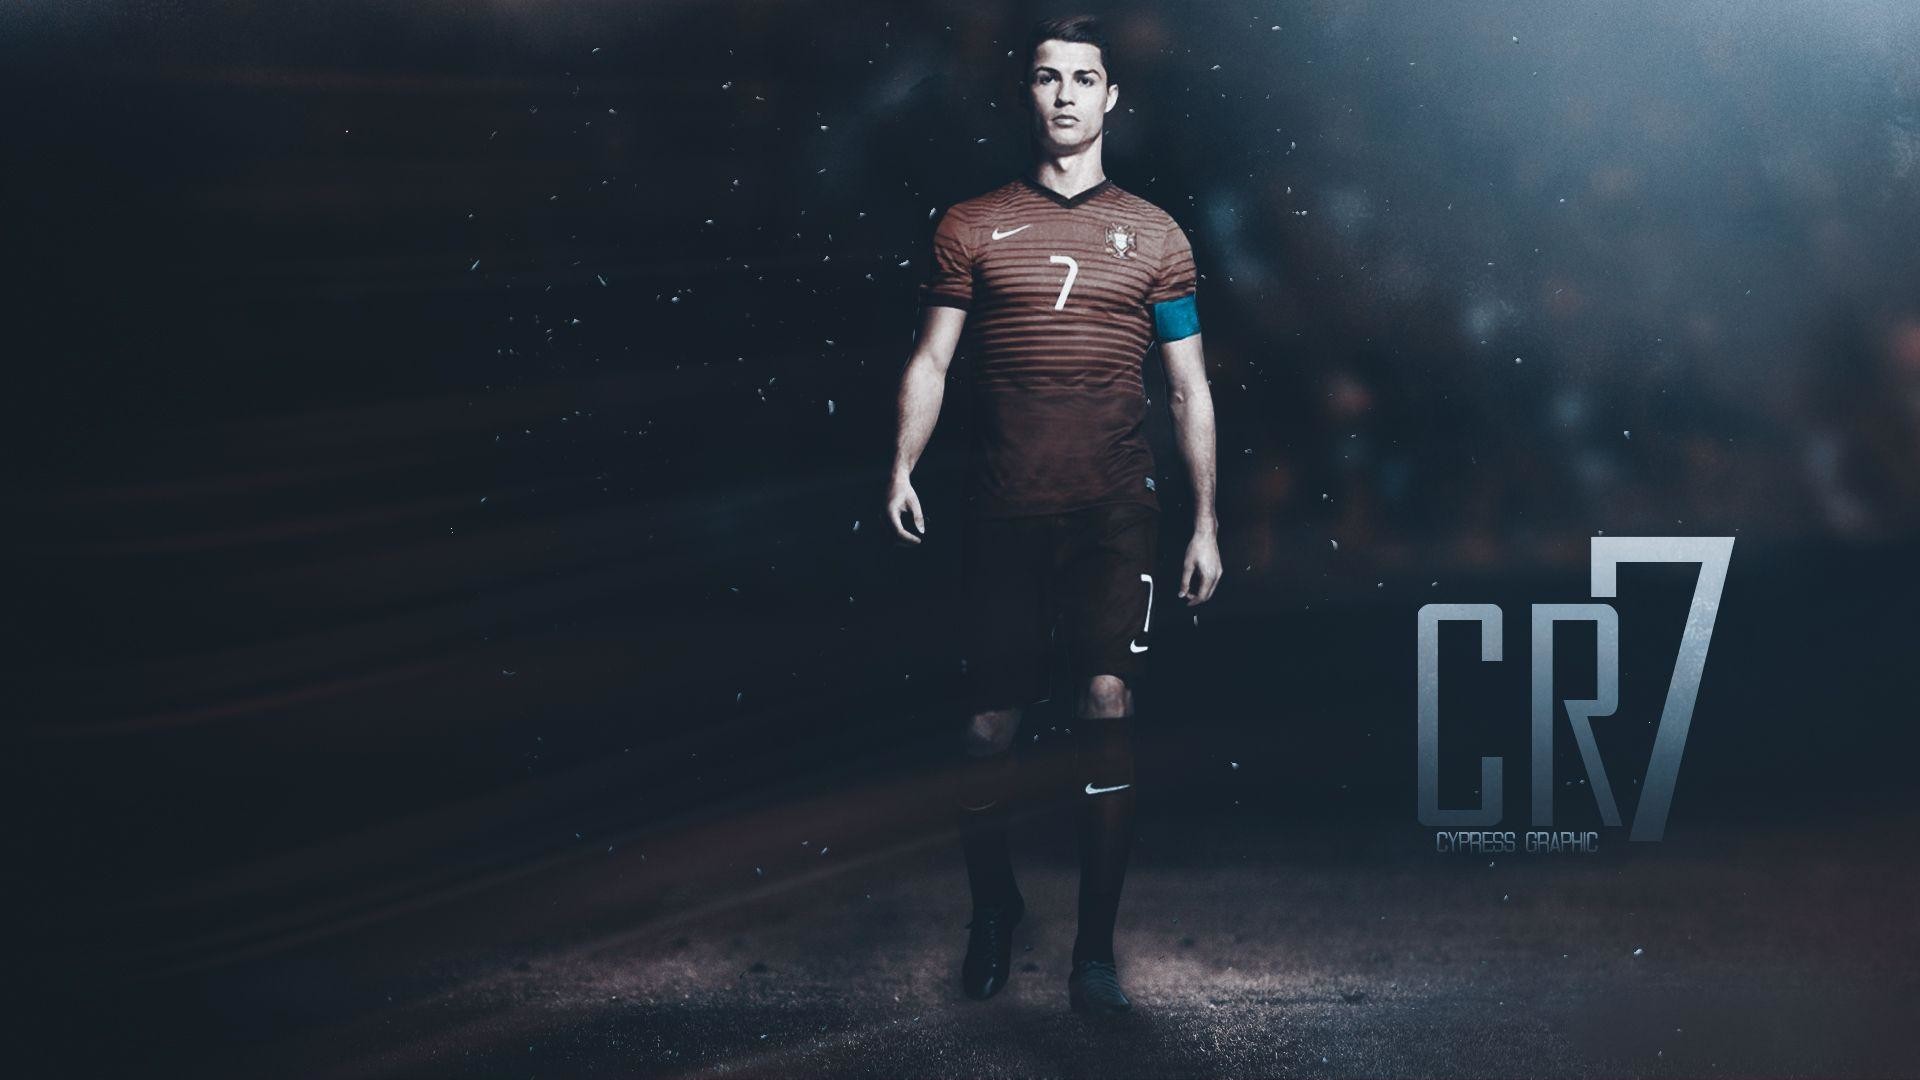 1920x1080 cr7 wallpaper hd image gallery hcpr .